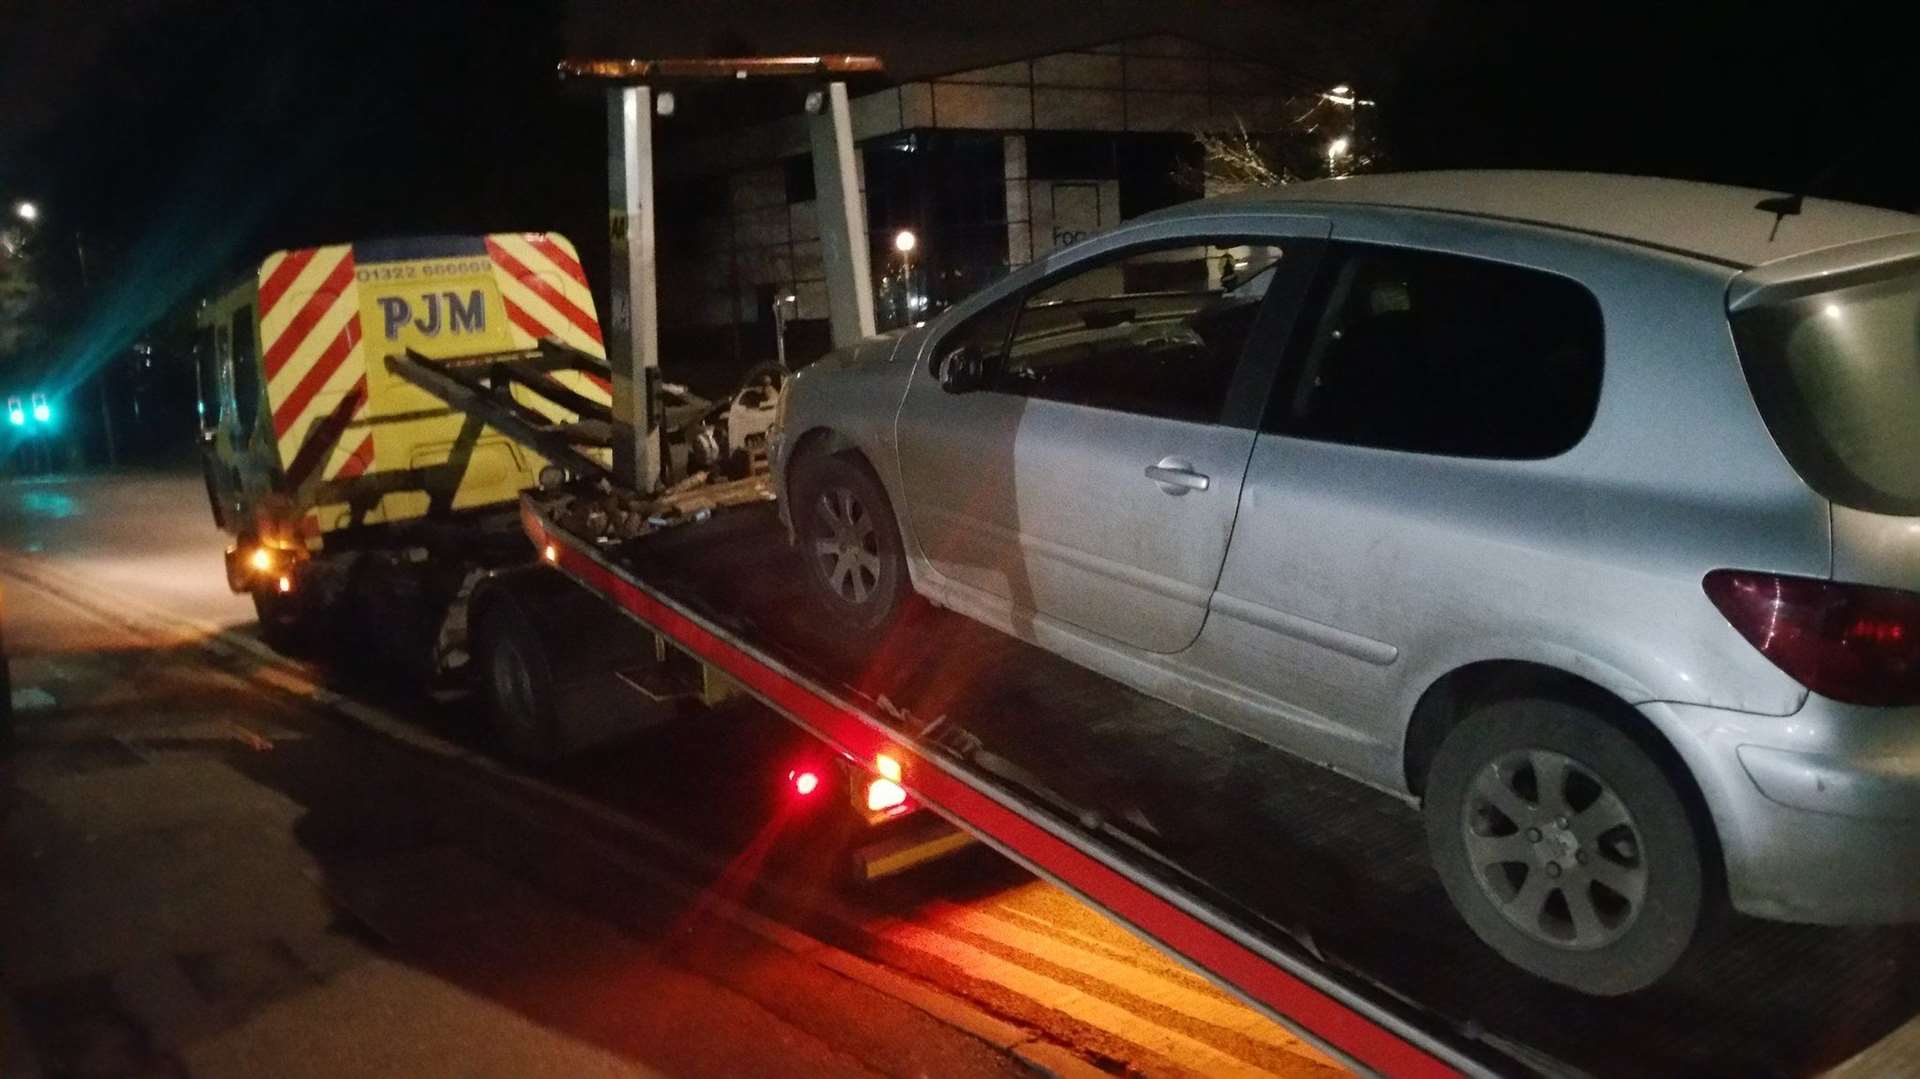 The vehicle is towed away (26458862)